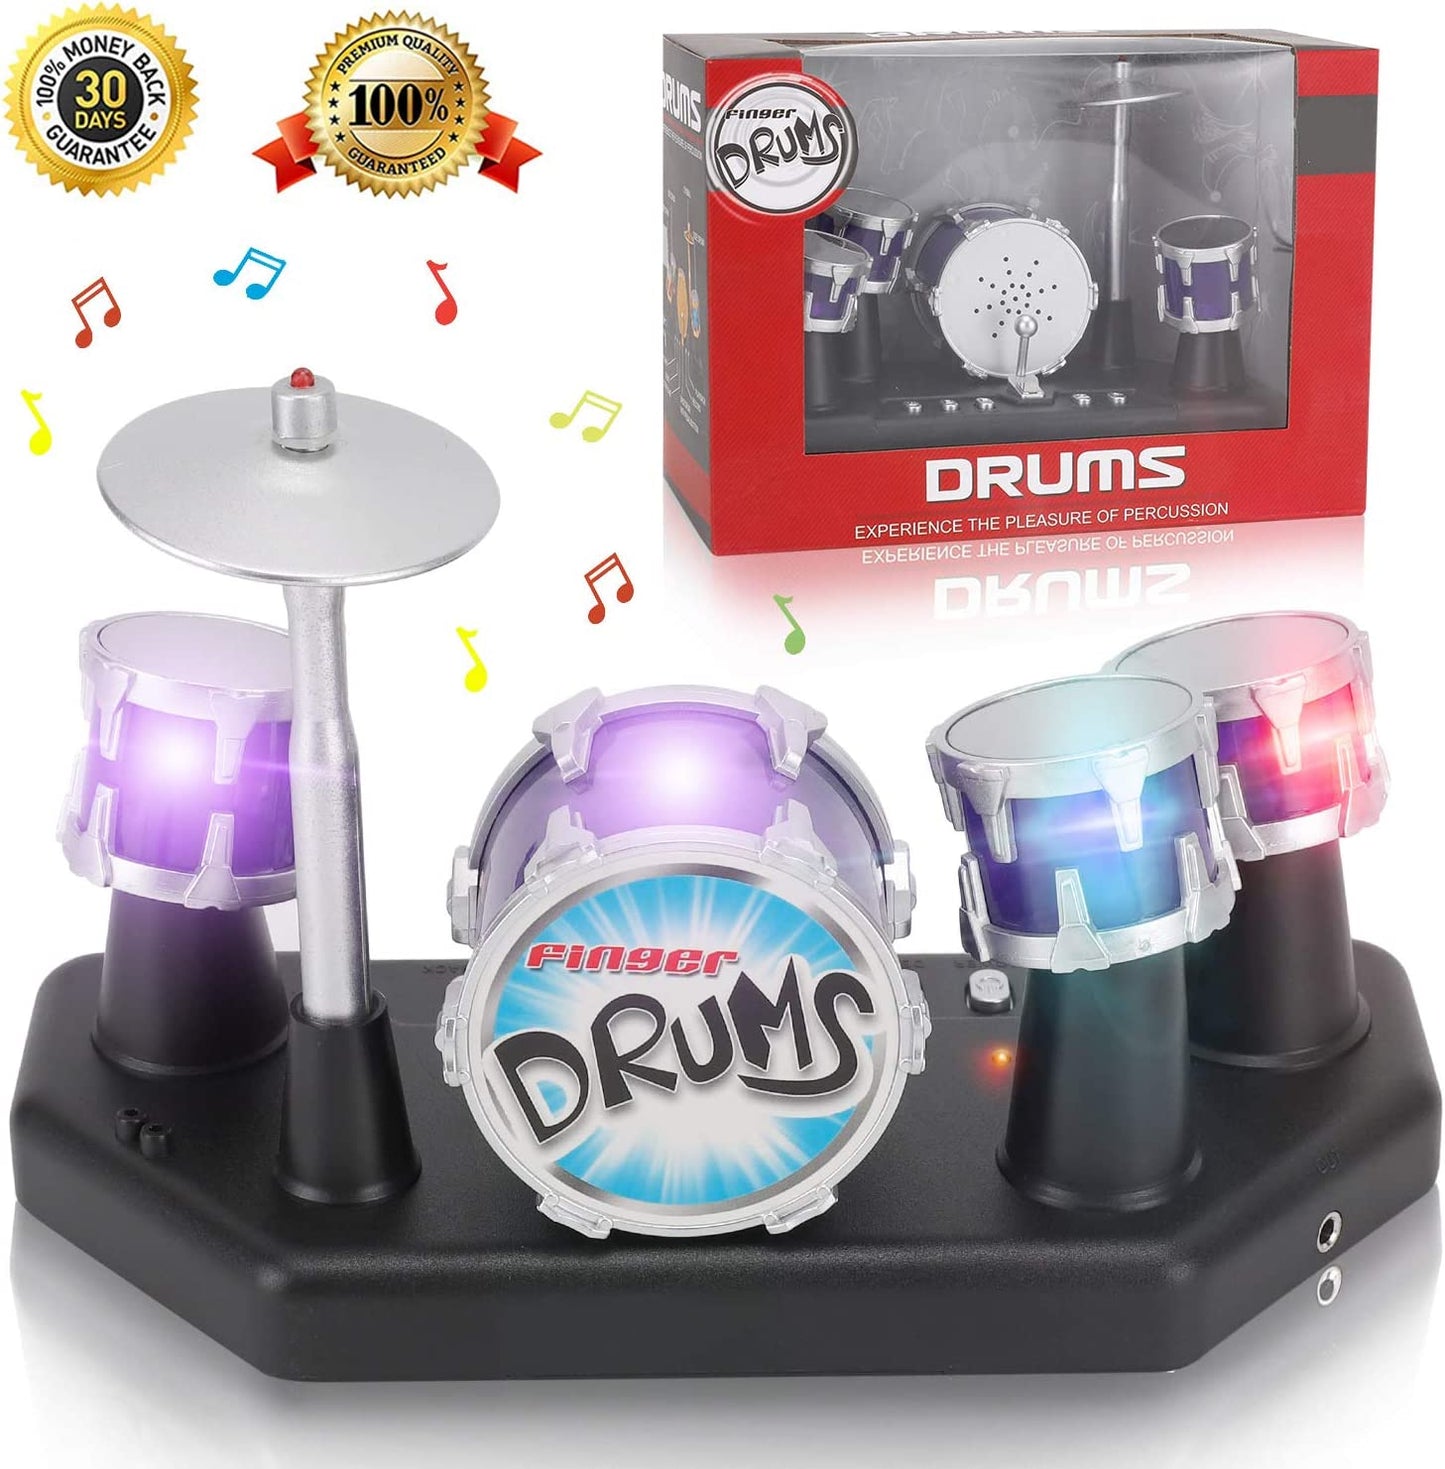 A mini finger drum set with colorful lights on. In the background you can see the packaging for the drum set.